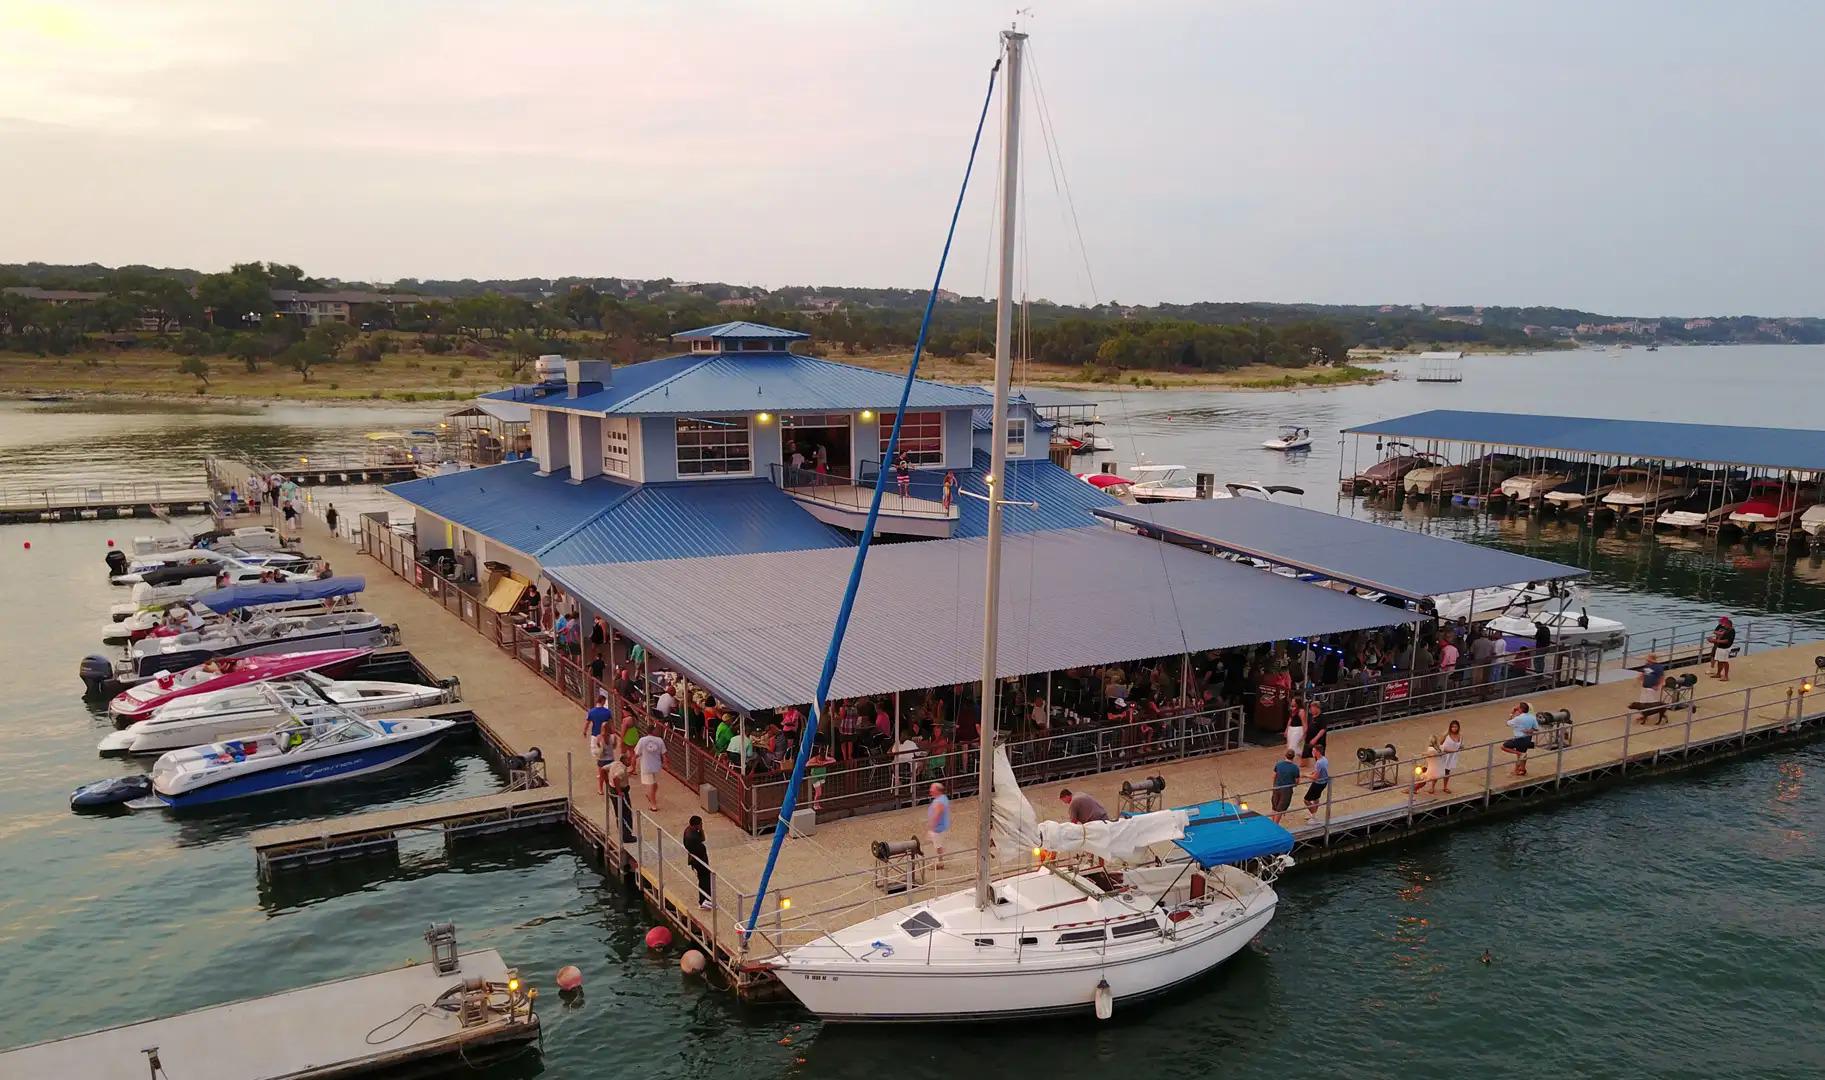 Captain Pete's Boathouse, Floating Restaurant and Fuel Dock on Lake Travis.